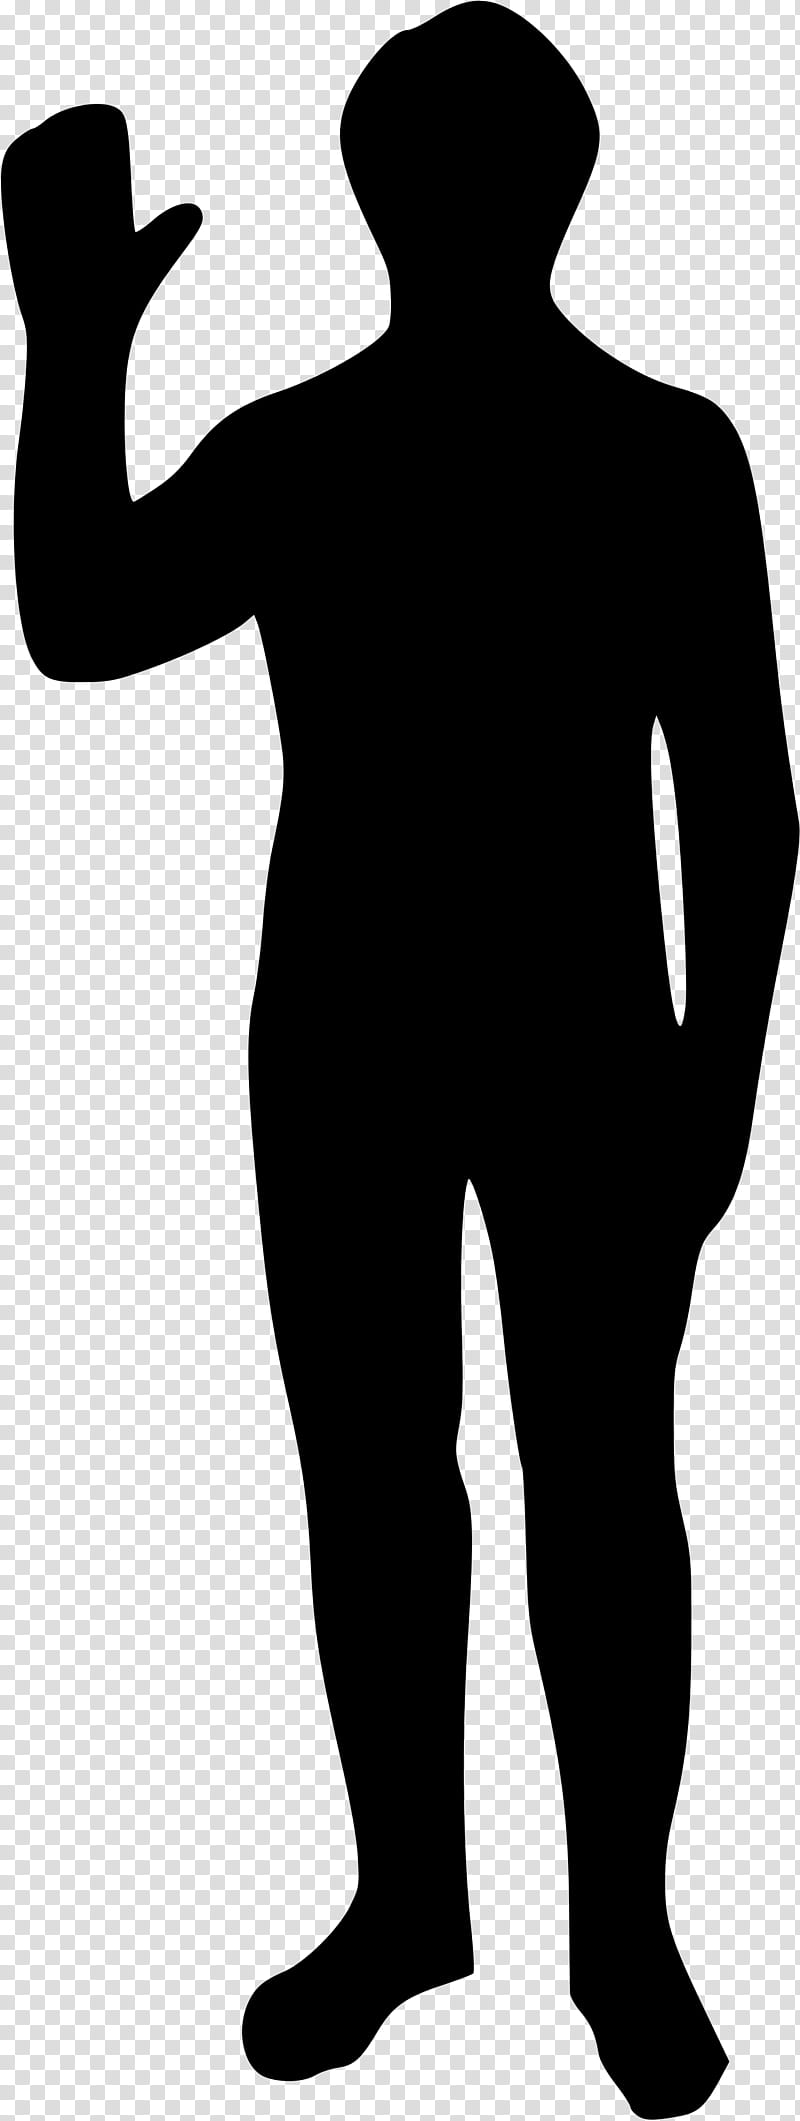 Person, Human, Human Body, Drawing, Introduction To The Human Body, Silhouette, Black, Standing transparent background PNG clipart